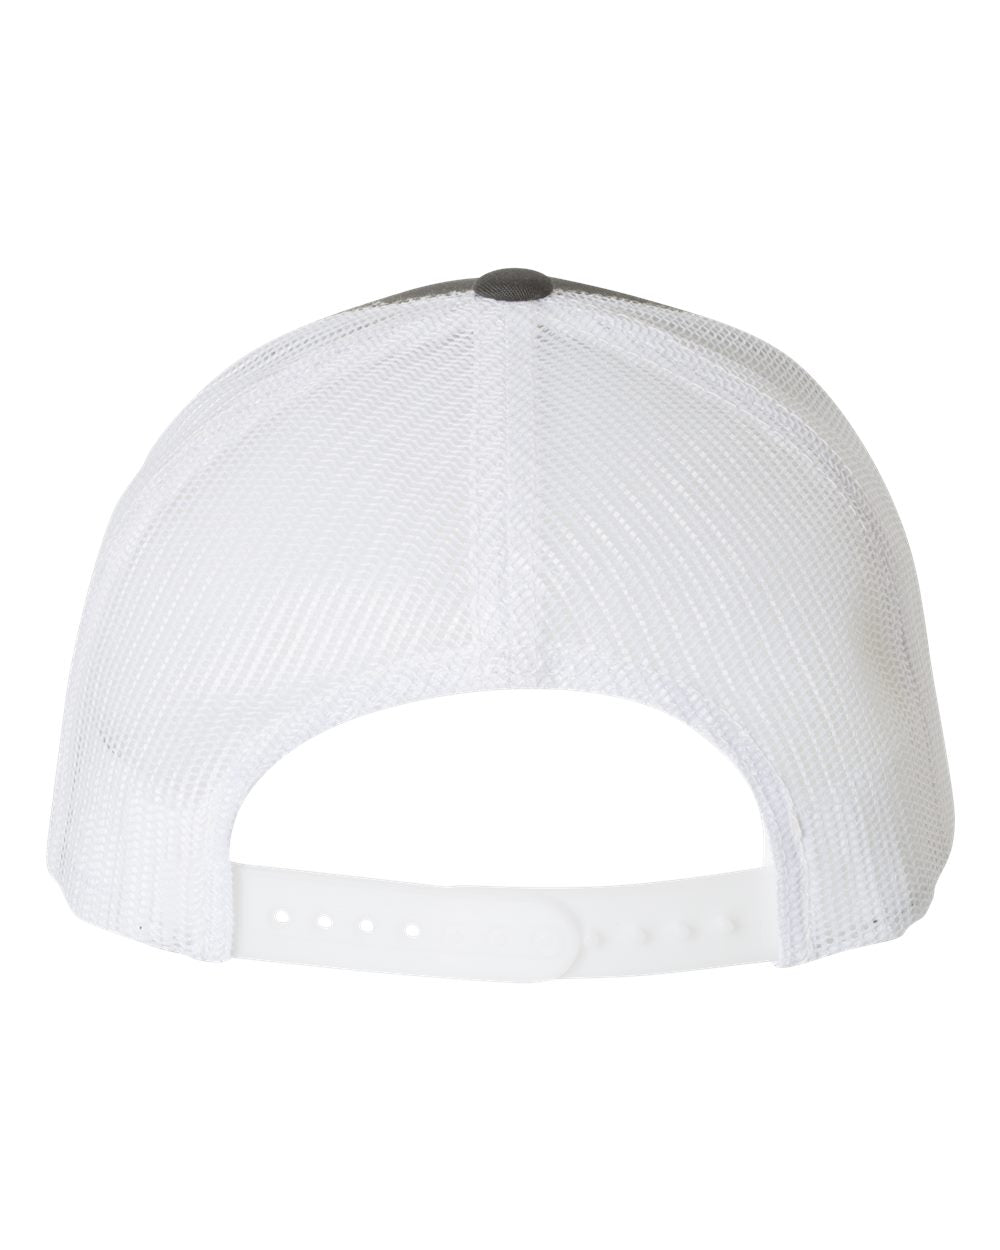 Swag Trucker Hat - Royal with White Mesh